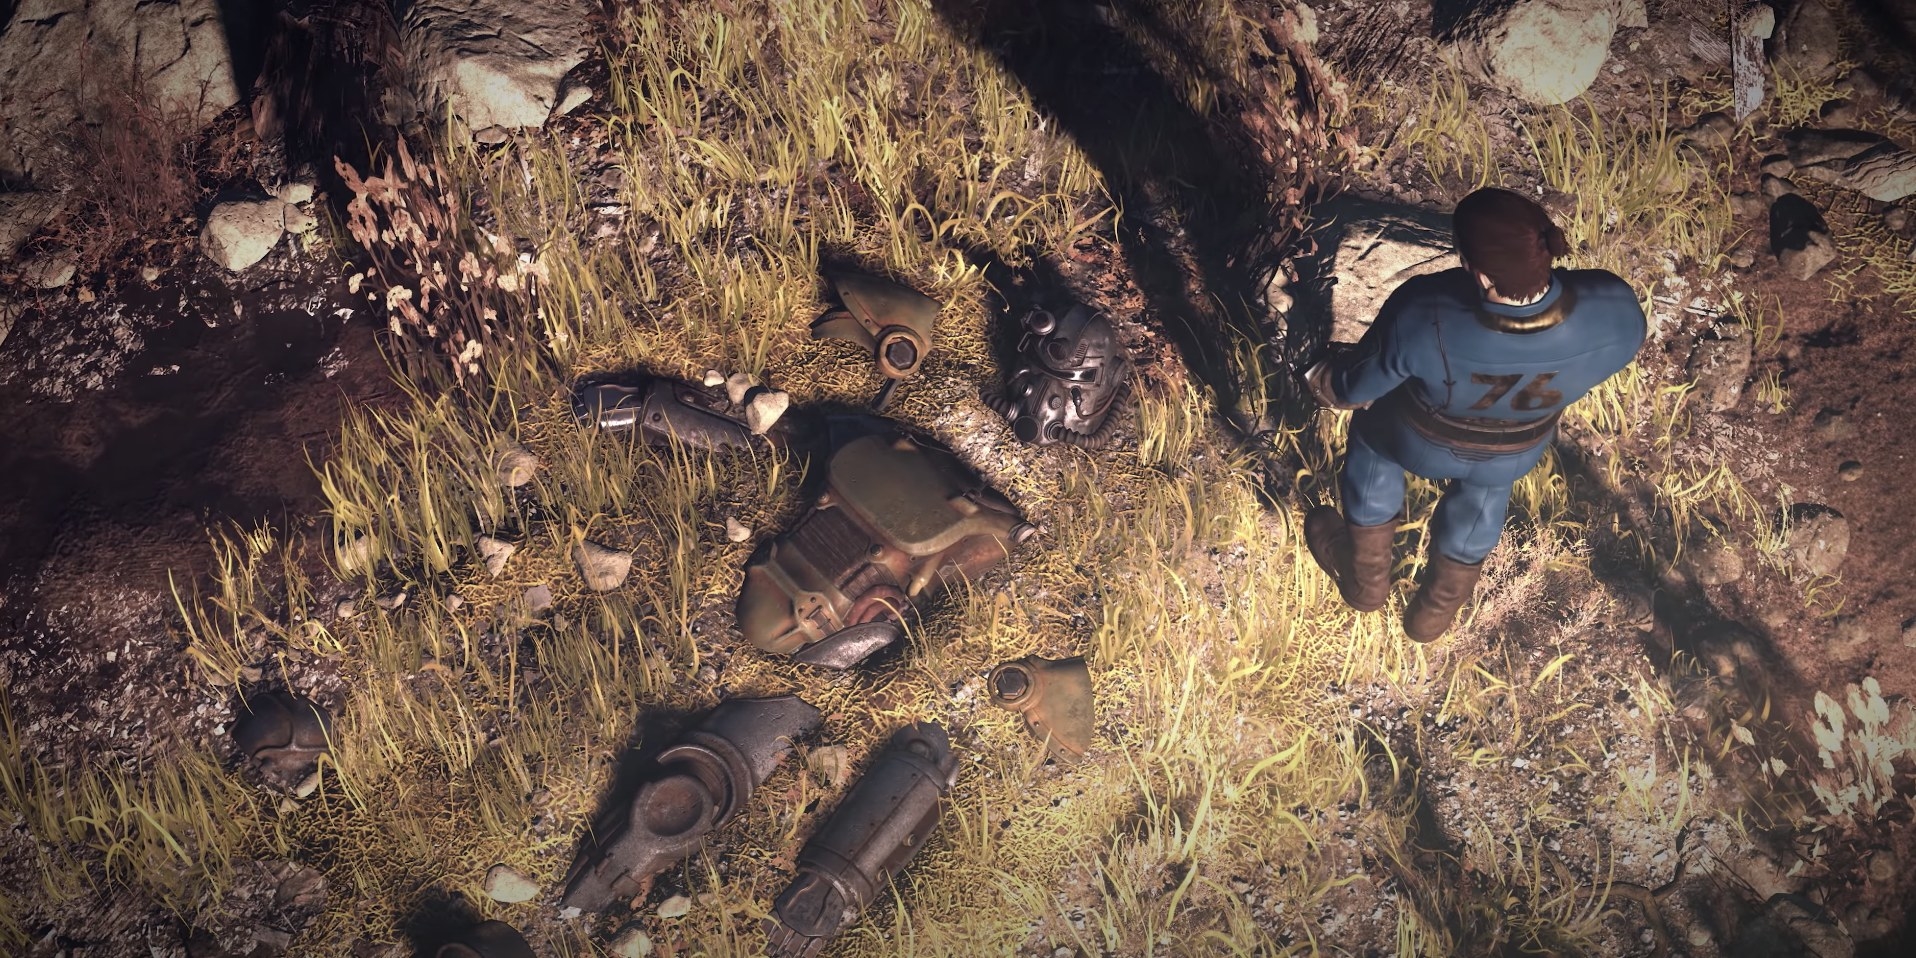 A man in a blue jumpsuit examines a decaying suit of futuristic armor in the ground.